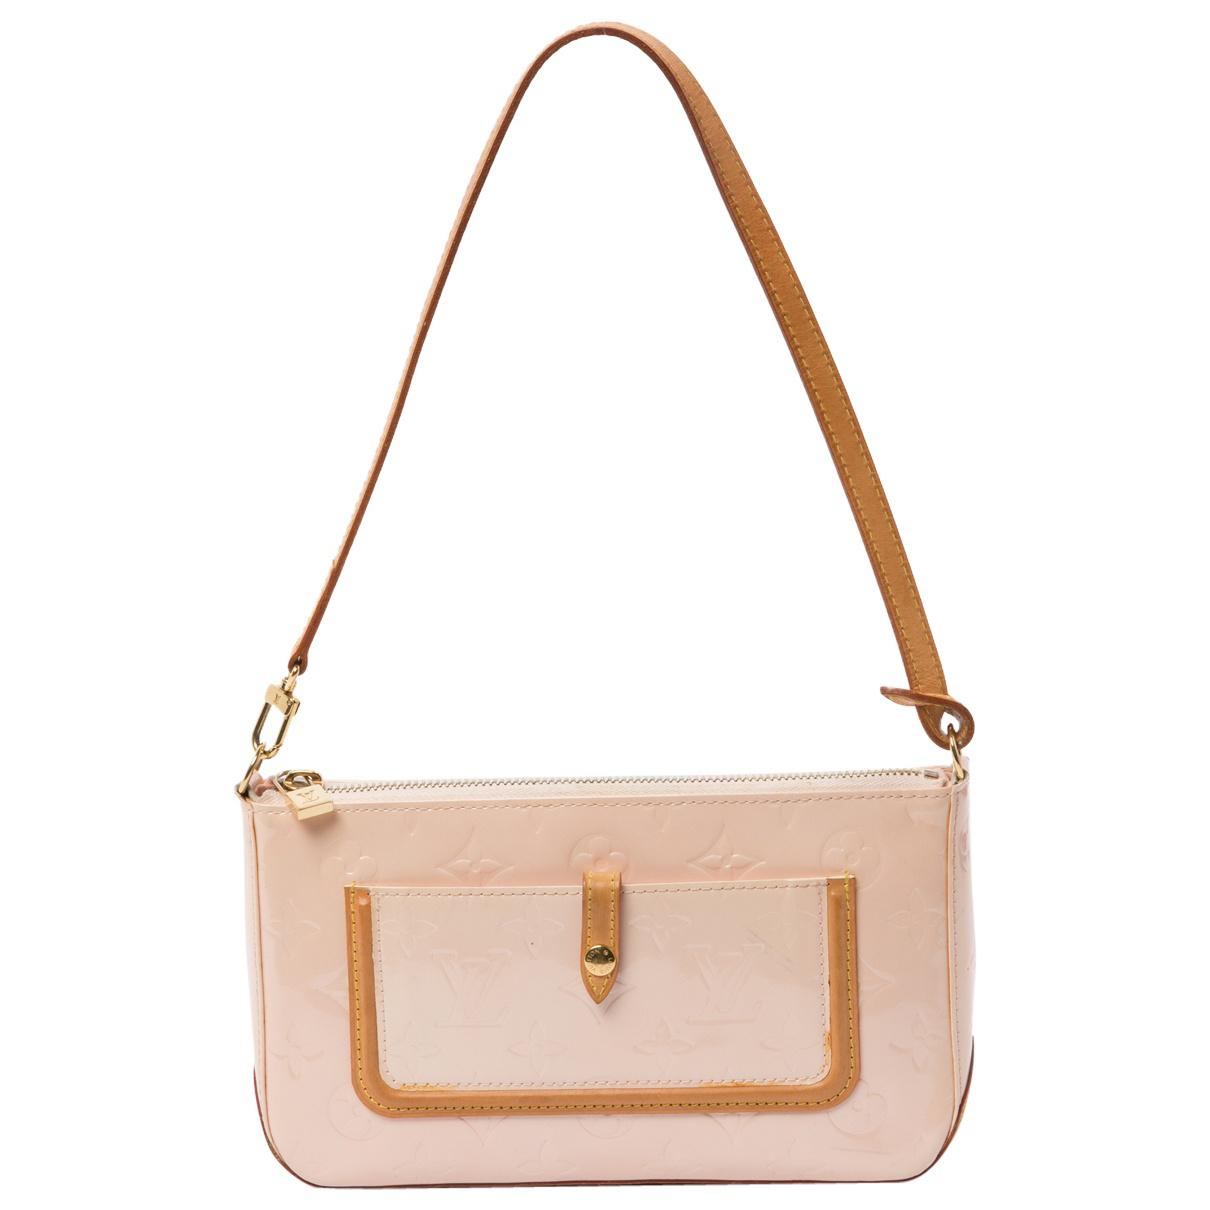 Louis Vuitton Patent Leather Mini Bag in Pink - Lyst